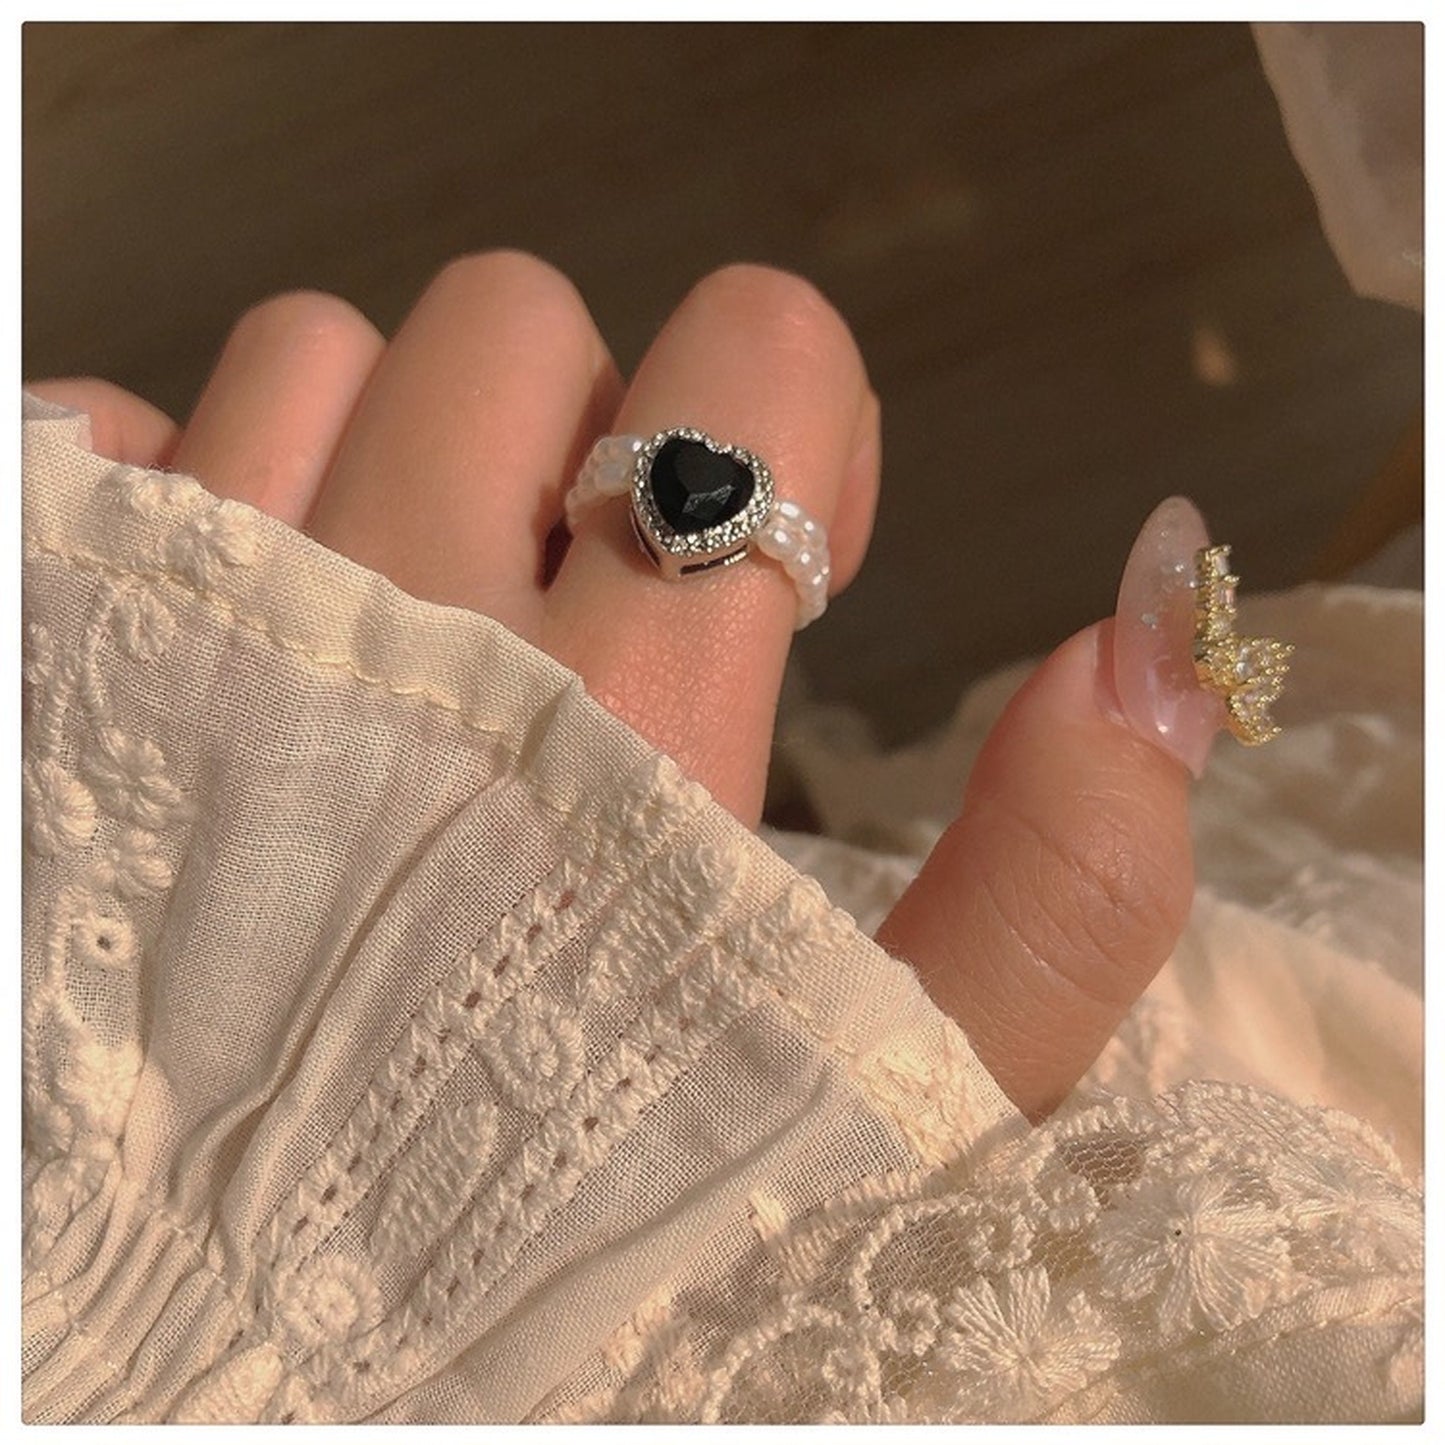 Handmade pearl ring, Double layer heart rings, Pearl beaded ring, Unique statement ring, Black spade ring, Y2K heart ring, Black heart ring